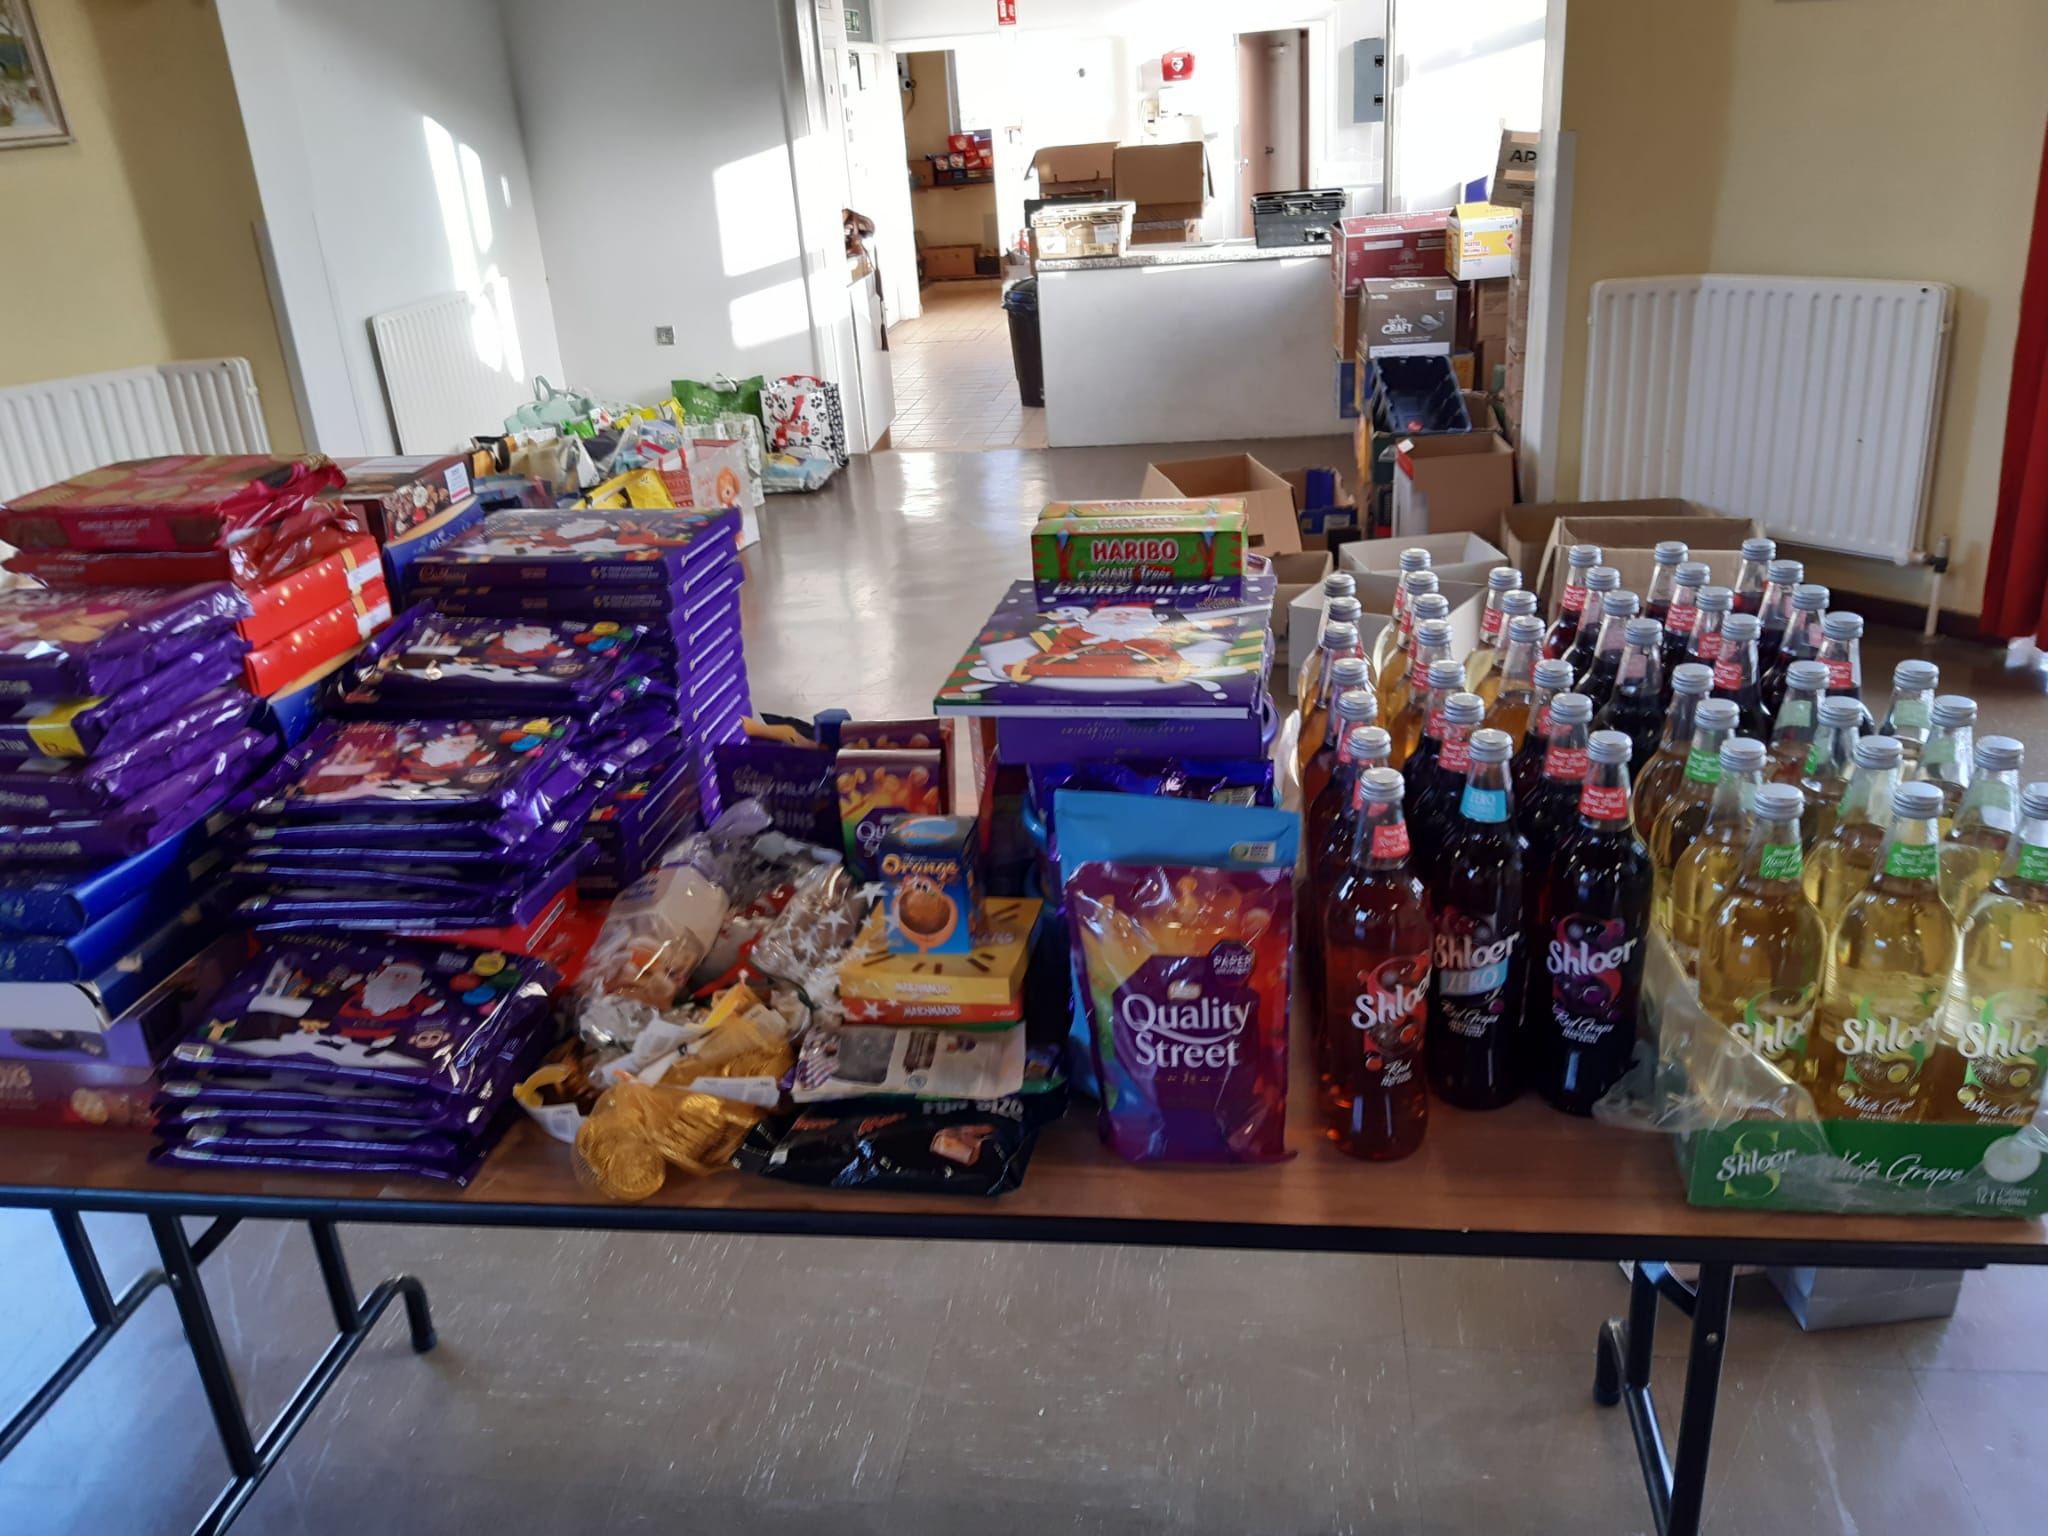 Whitehead Storehouse – Food Bank For Whitehead Northern Ireland